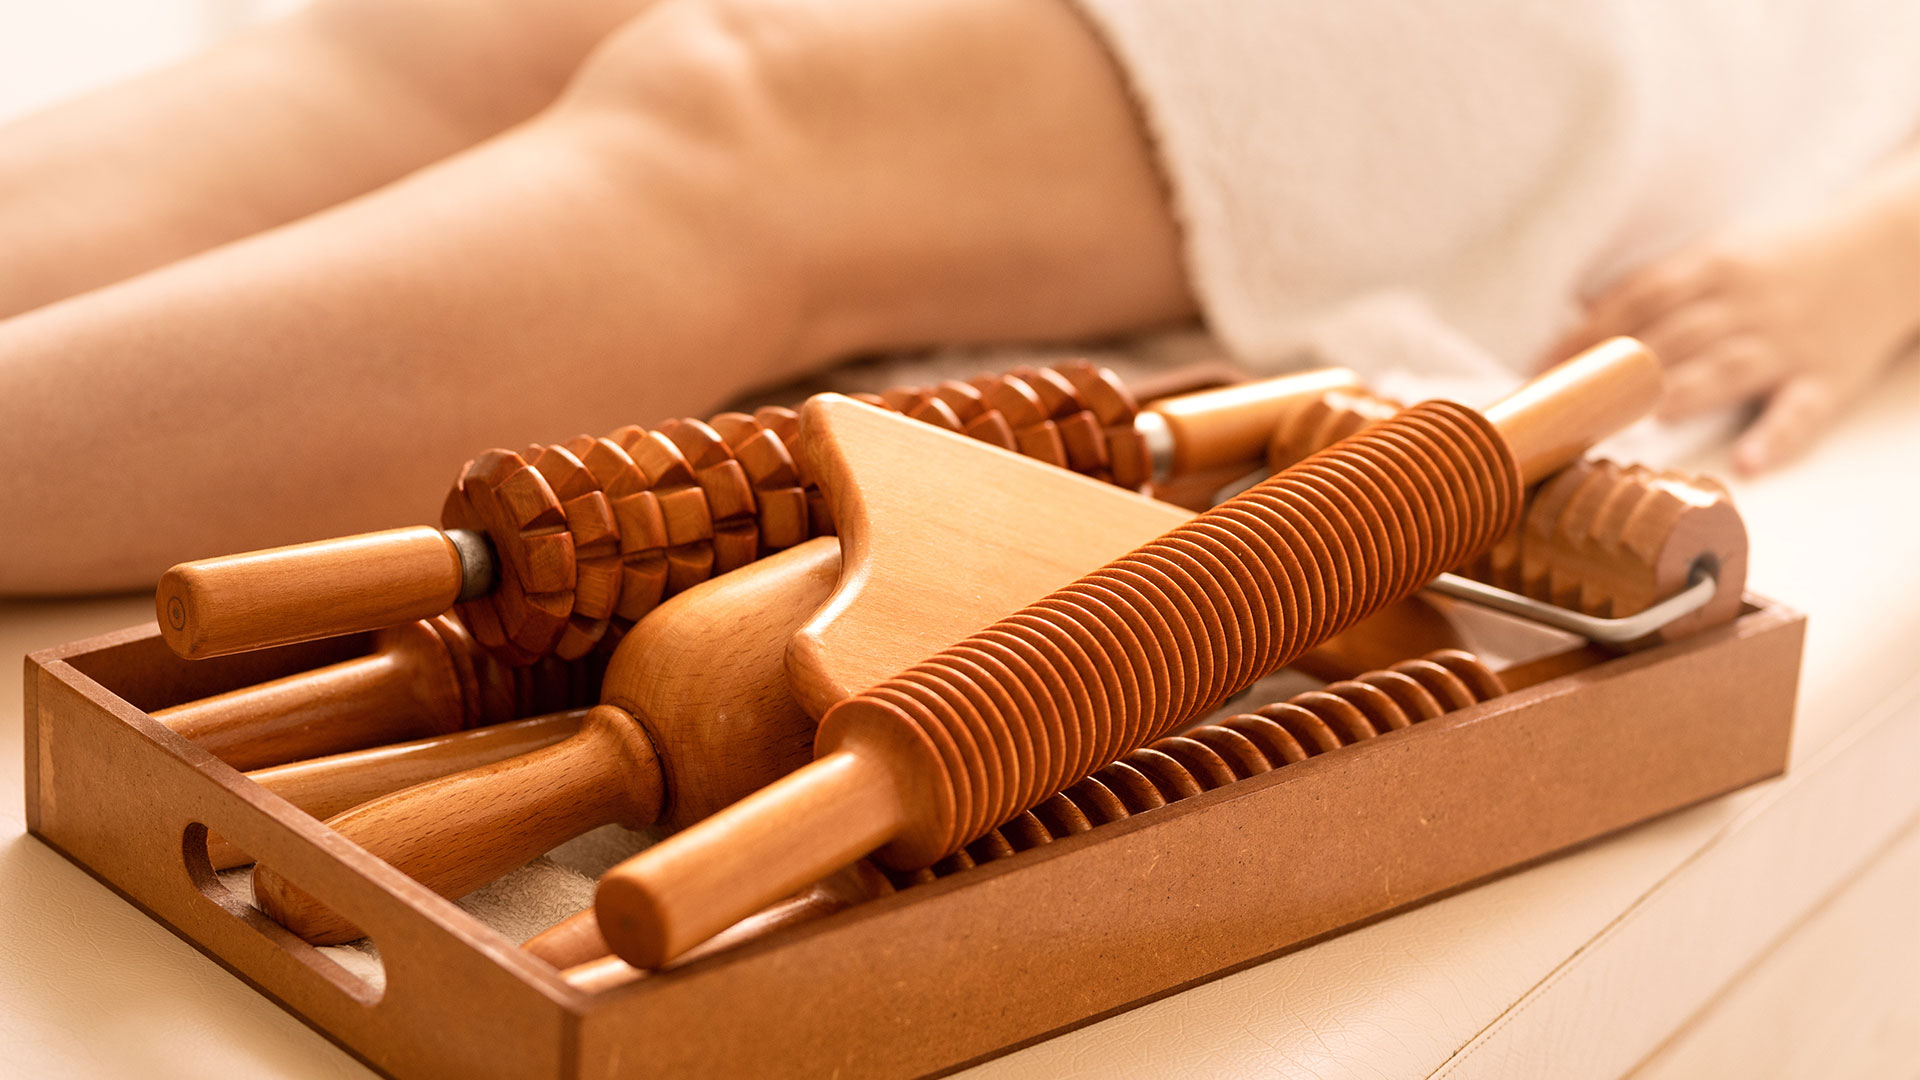 Types of tools used in a massage therapy - Serenity Sheer Massage